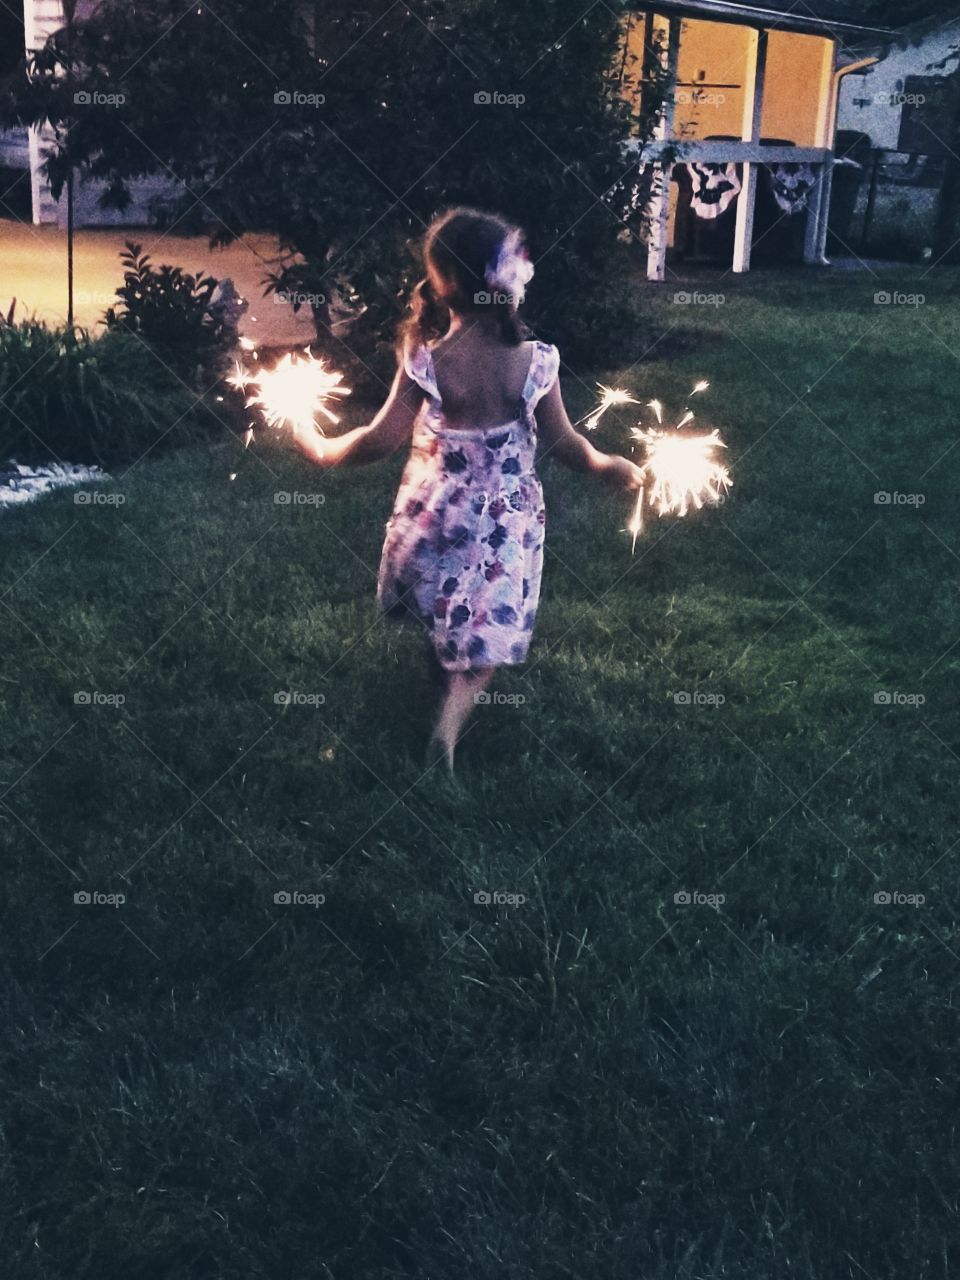 Running with sparklers